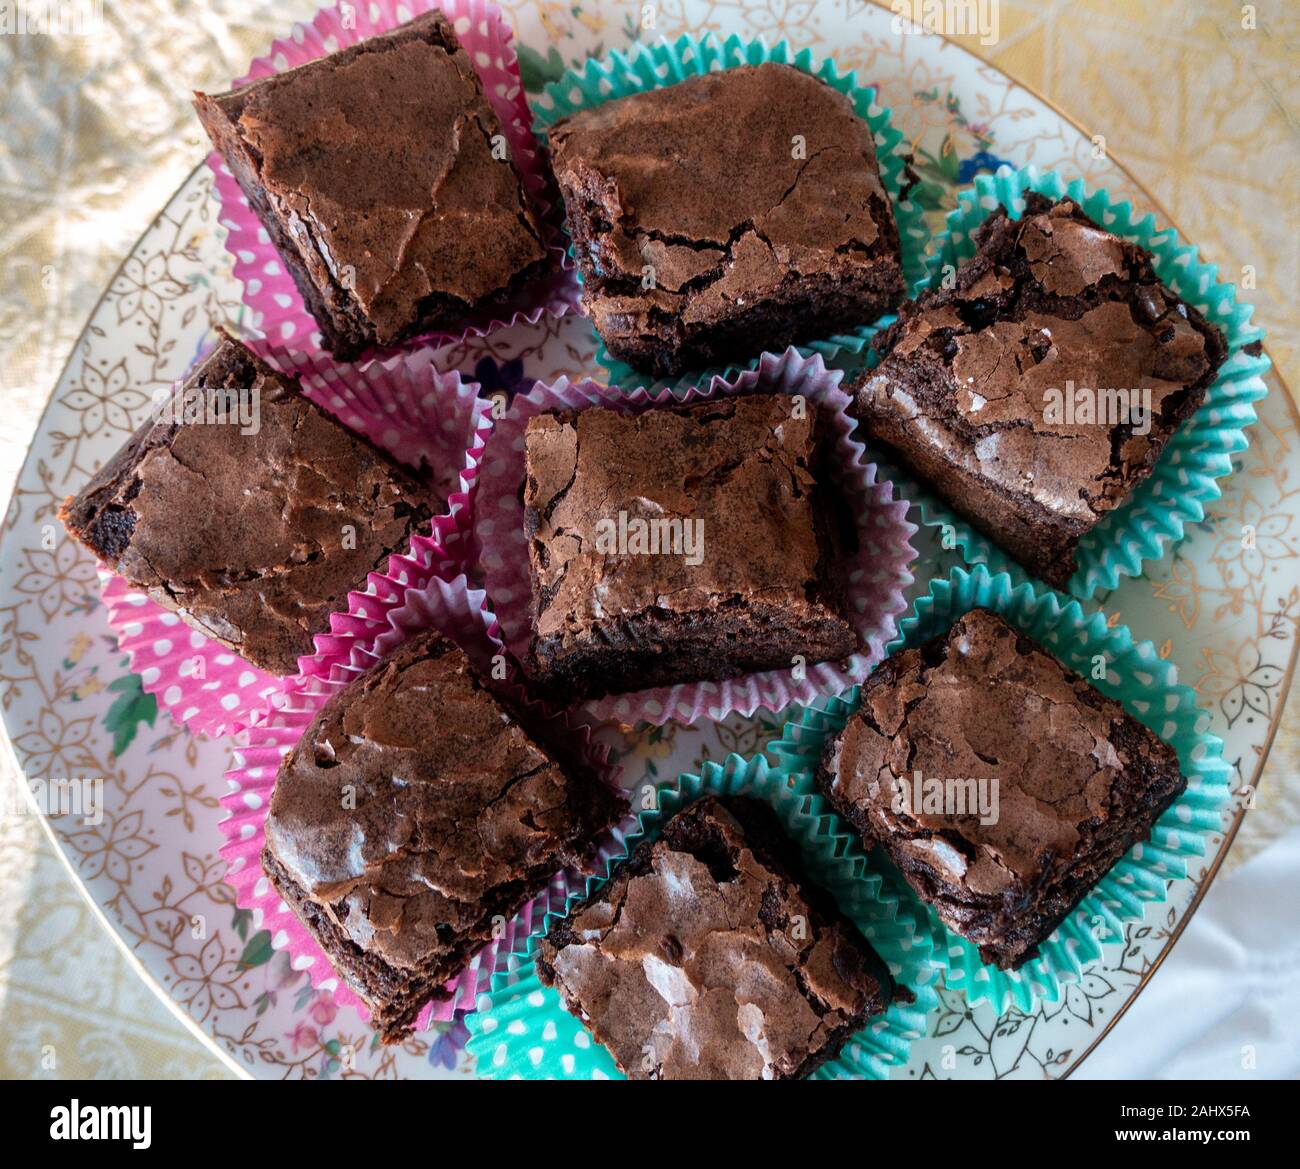 A plate of homemade chocolate brownies in paper cases seen from above Stock Photo